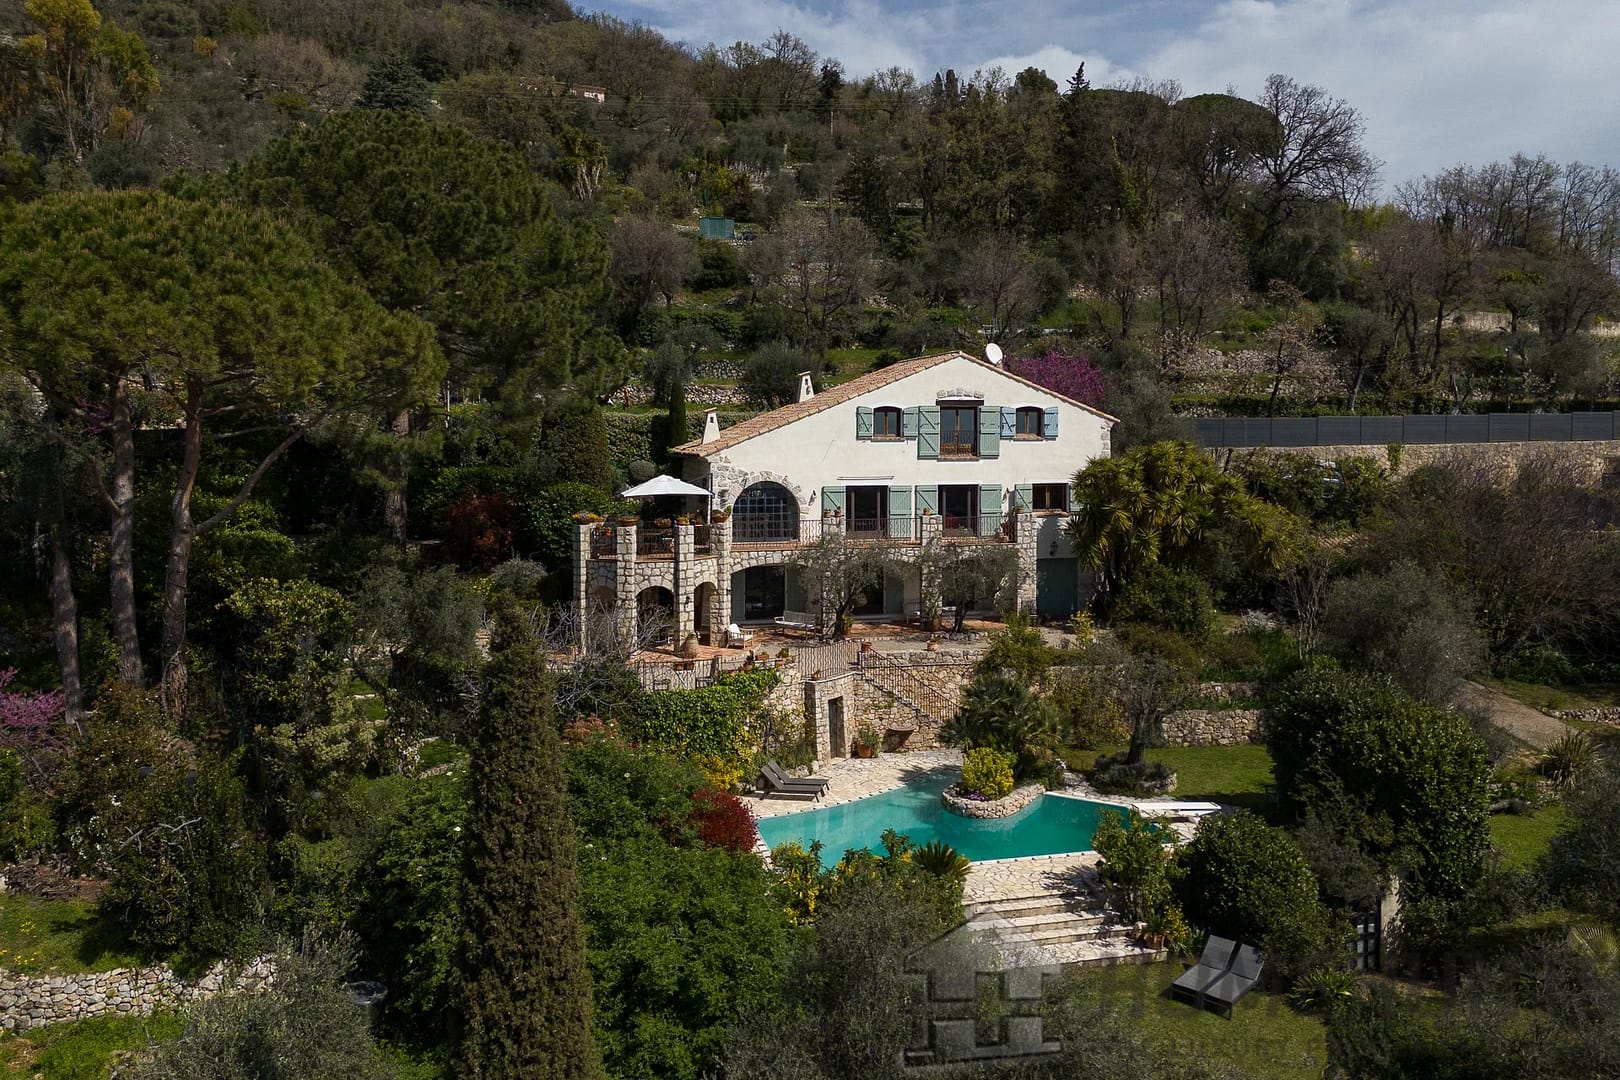 5 Bedroom Villa/House in Chateauneuf Grasse 7